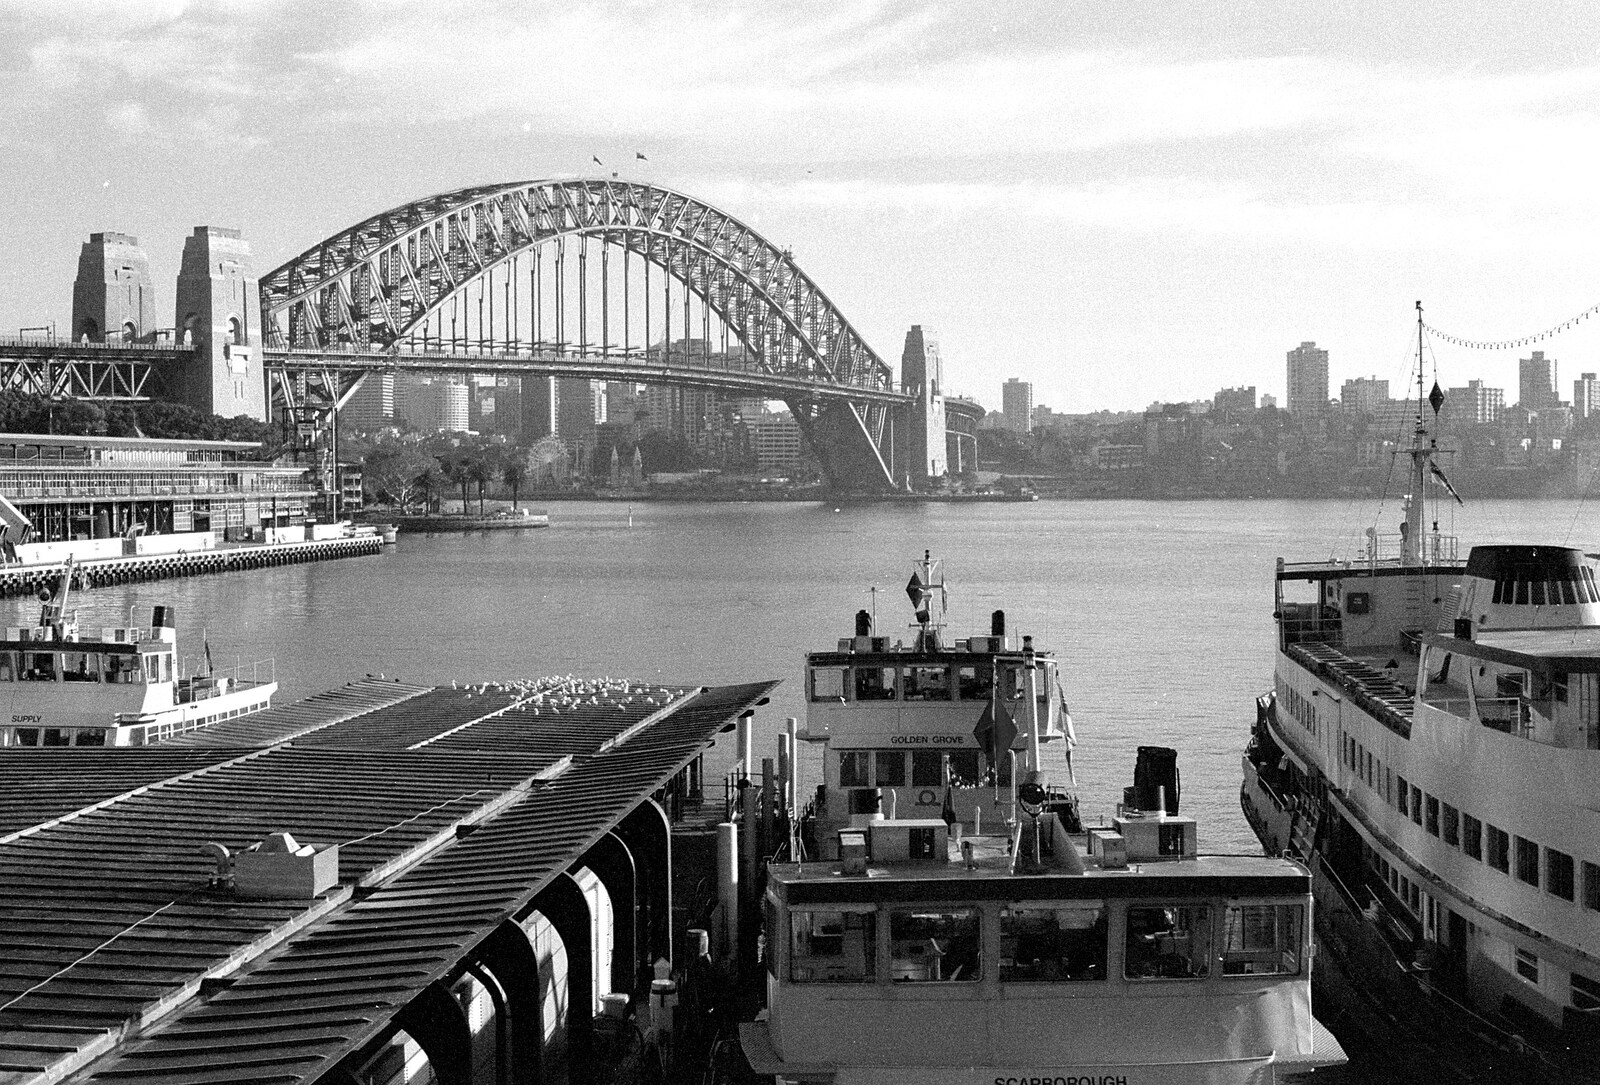 The view from the station at Circular Quay from A Trip to the Zoo, Sydney, Australia - 7th April 2000